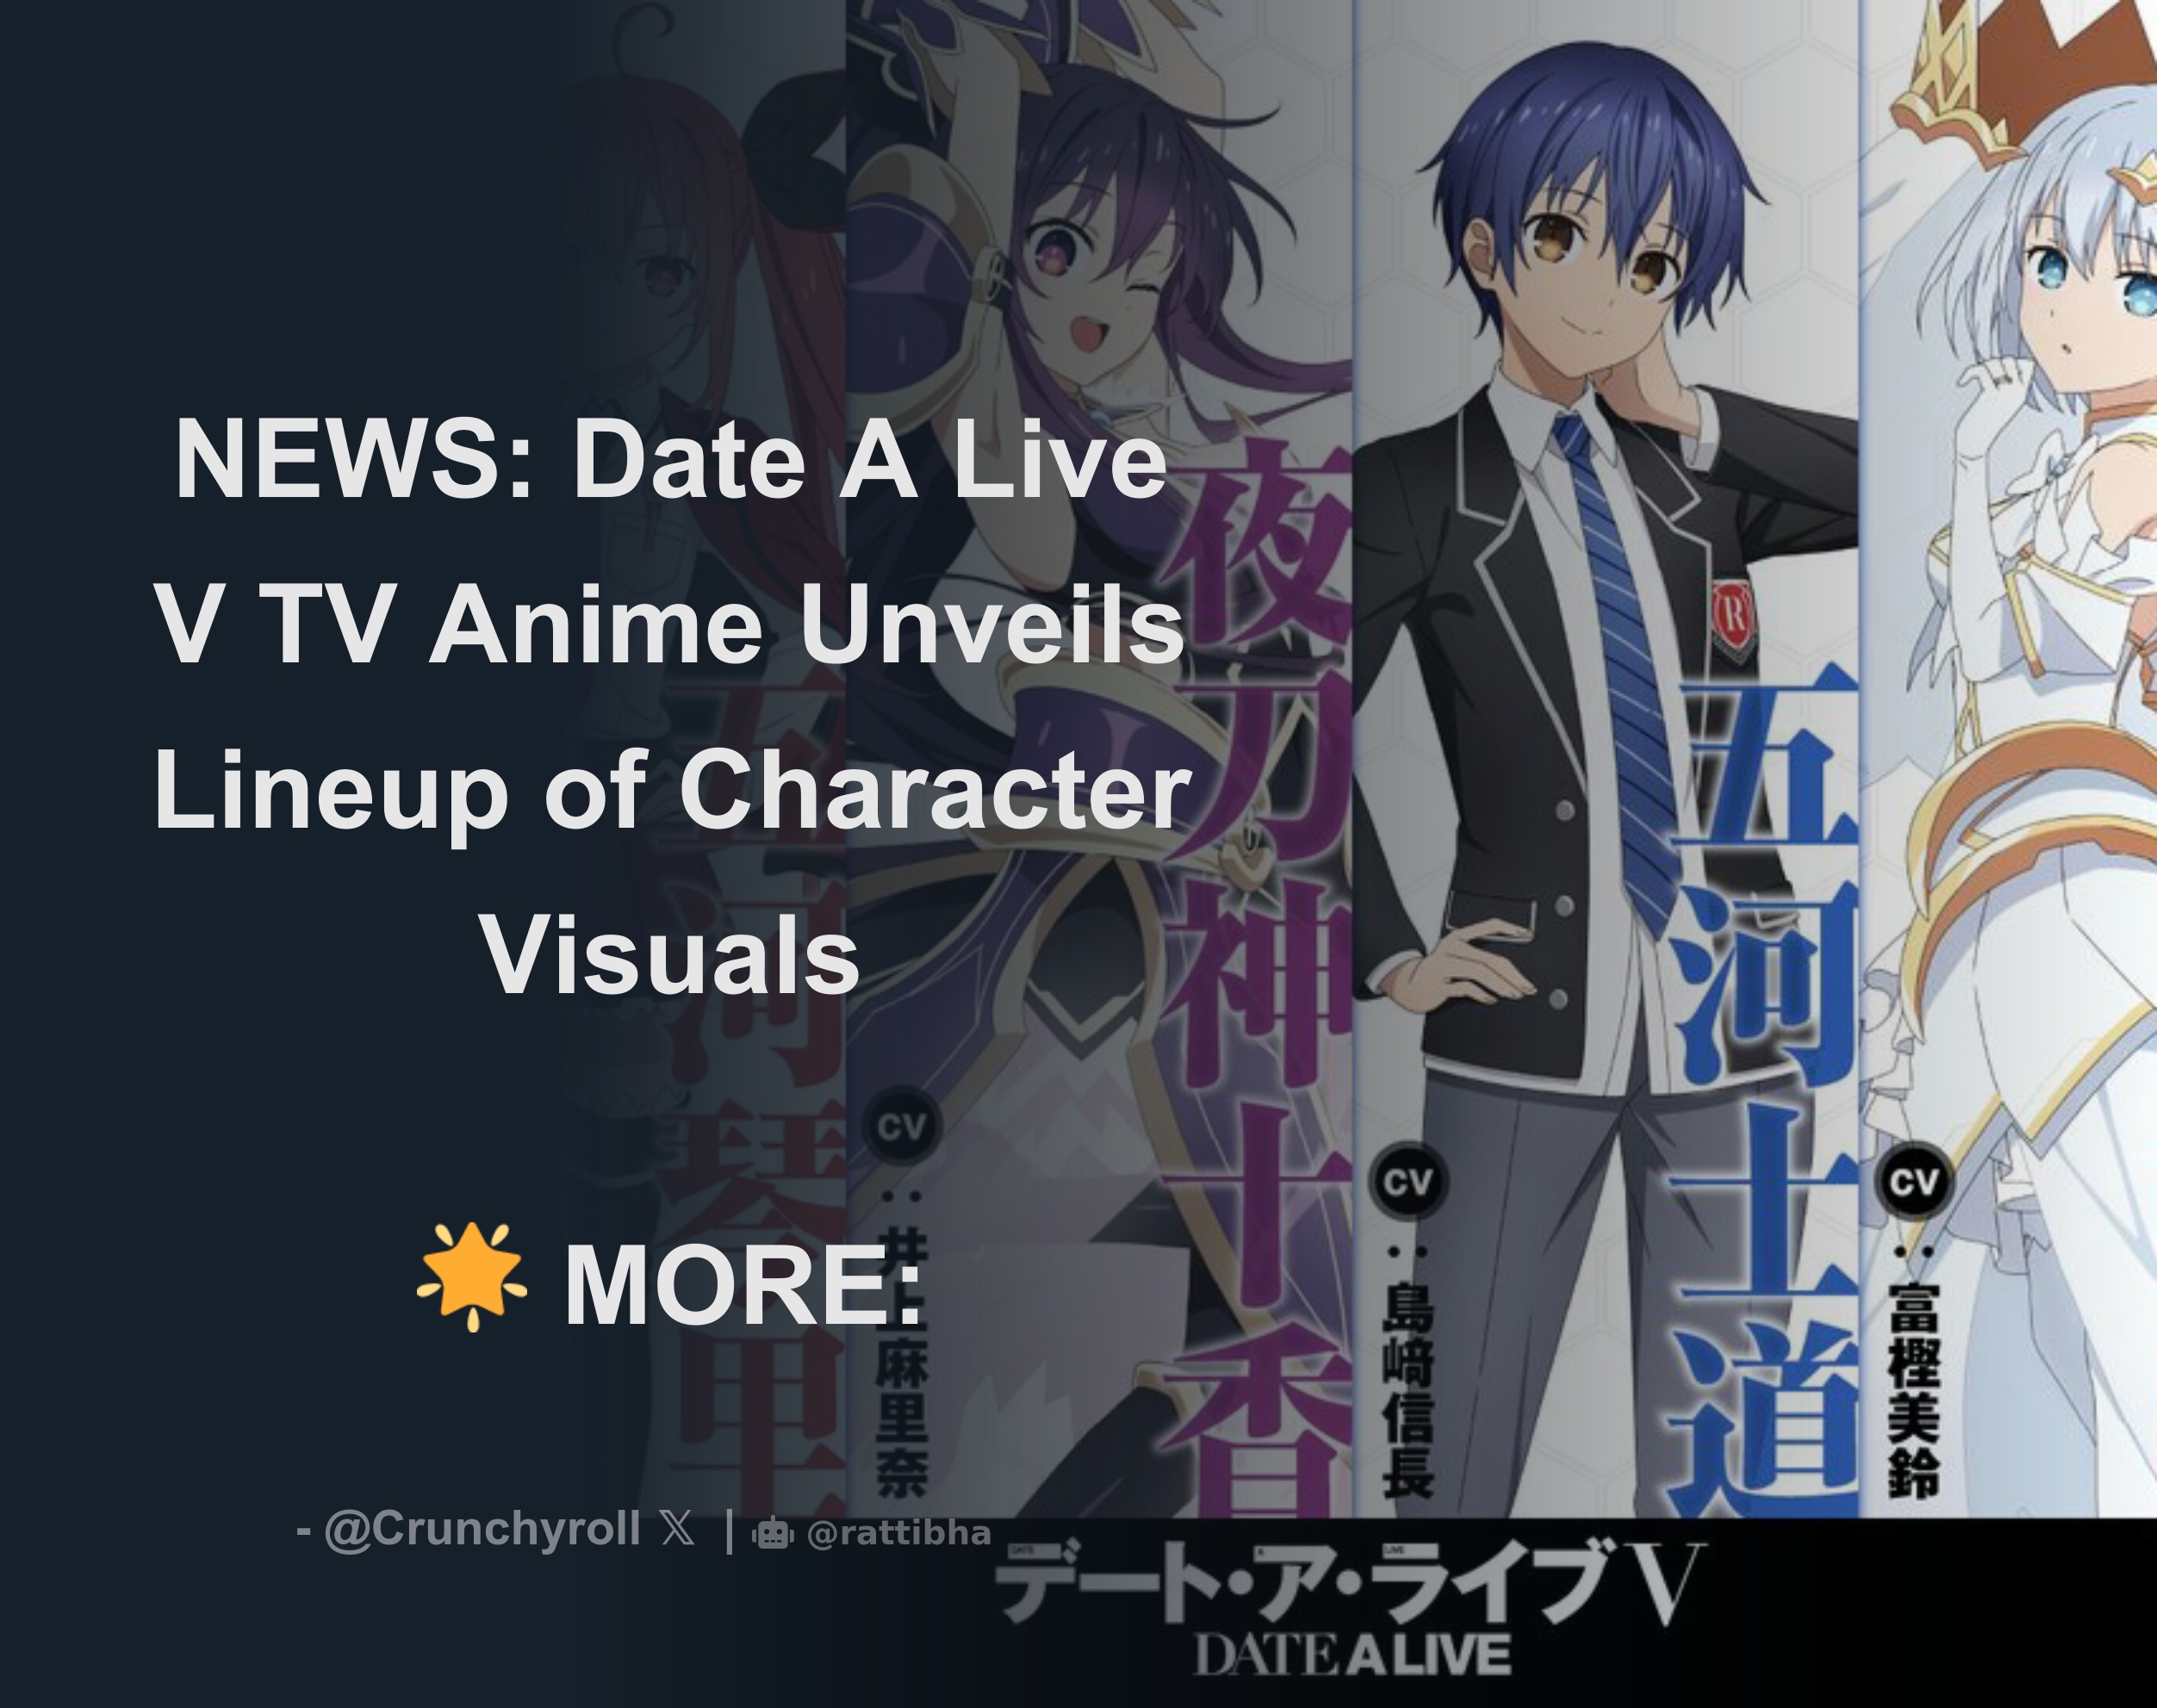 Date A Live V TV Anime Unveils Lineup of Character Visuals